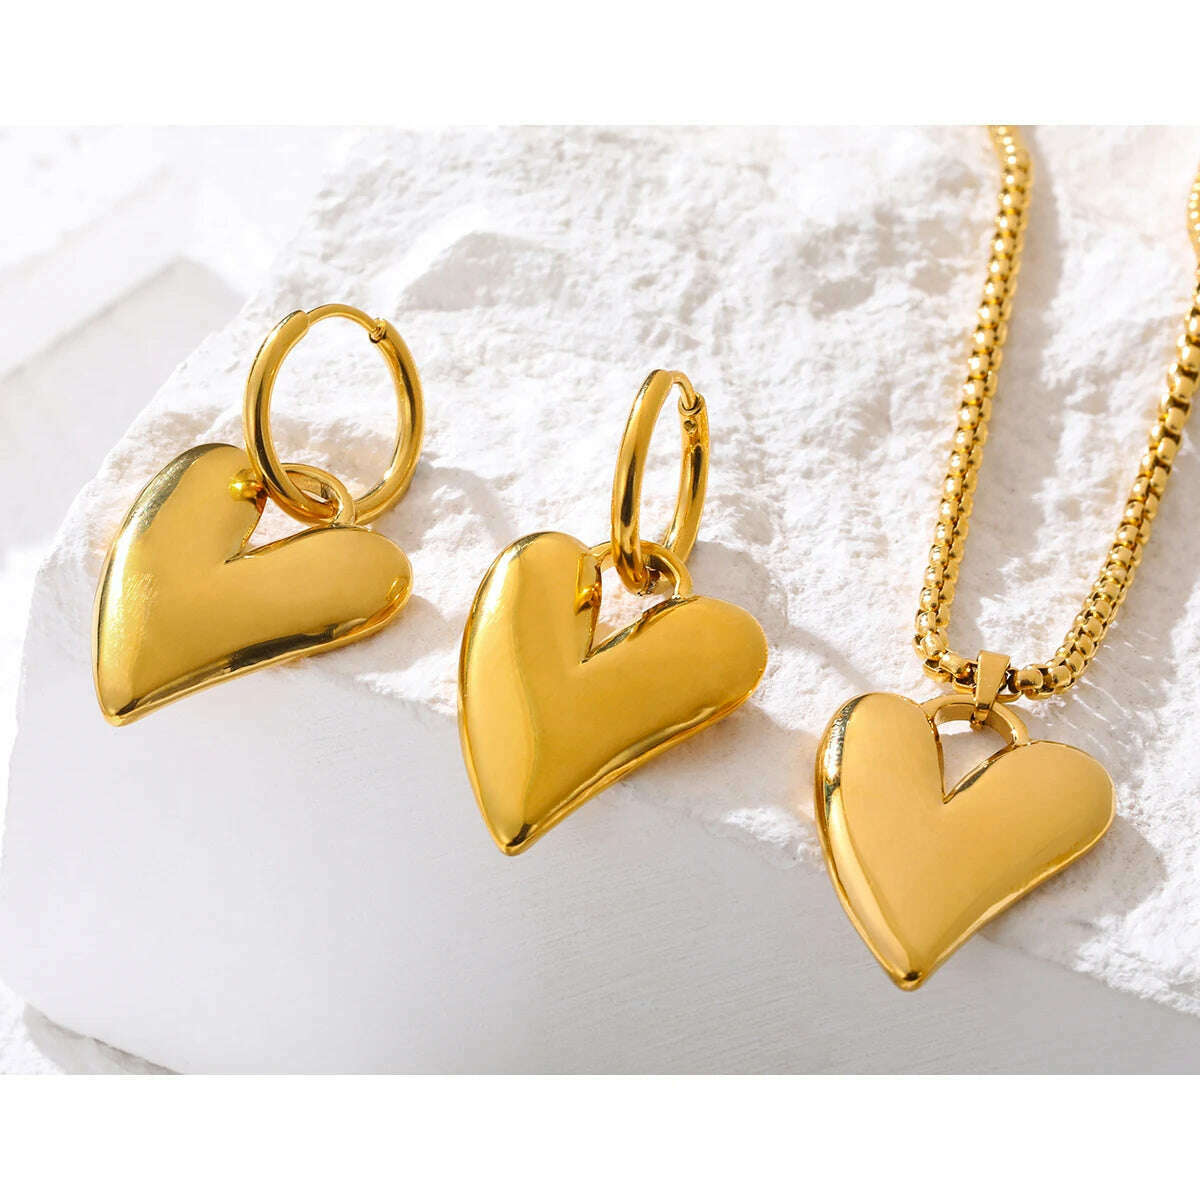 KIMLUD, YACHAN 18K Gold Plated Stainless Steel Irregular Heart Necklace Earrings for Women Glossy Chic Waterproof Jewelry Set, KIMLUD Women's Clothes